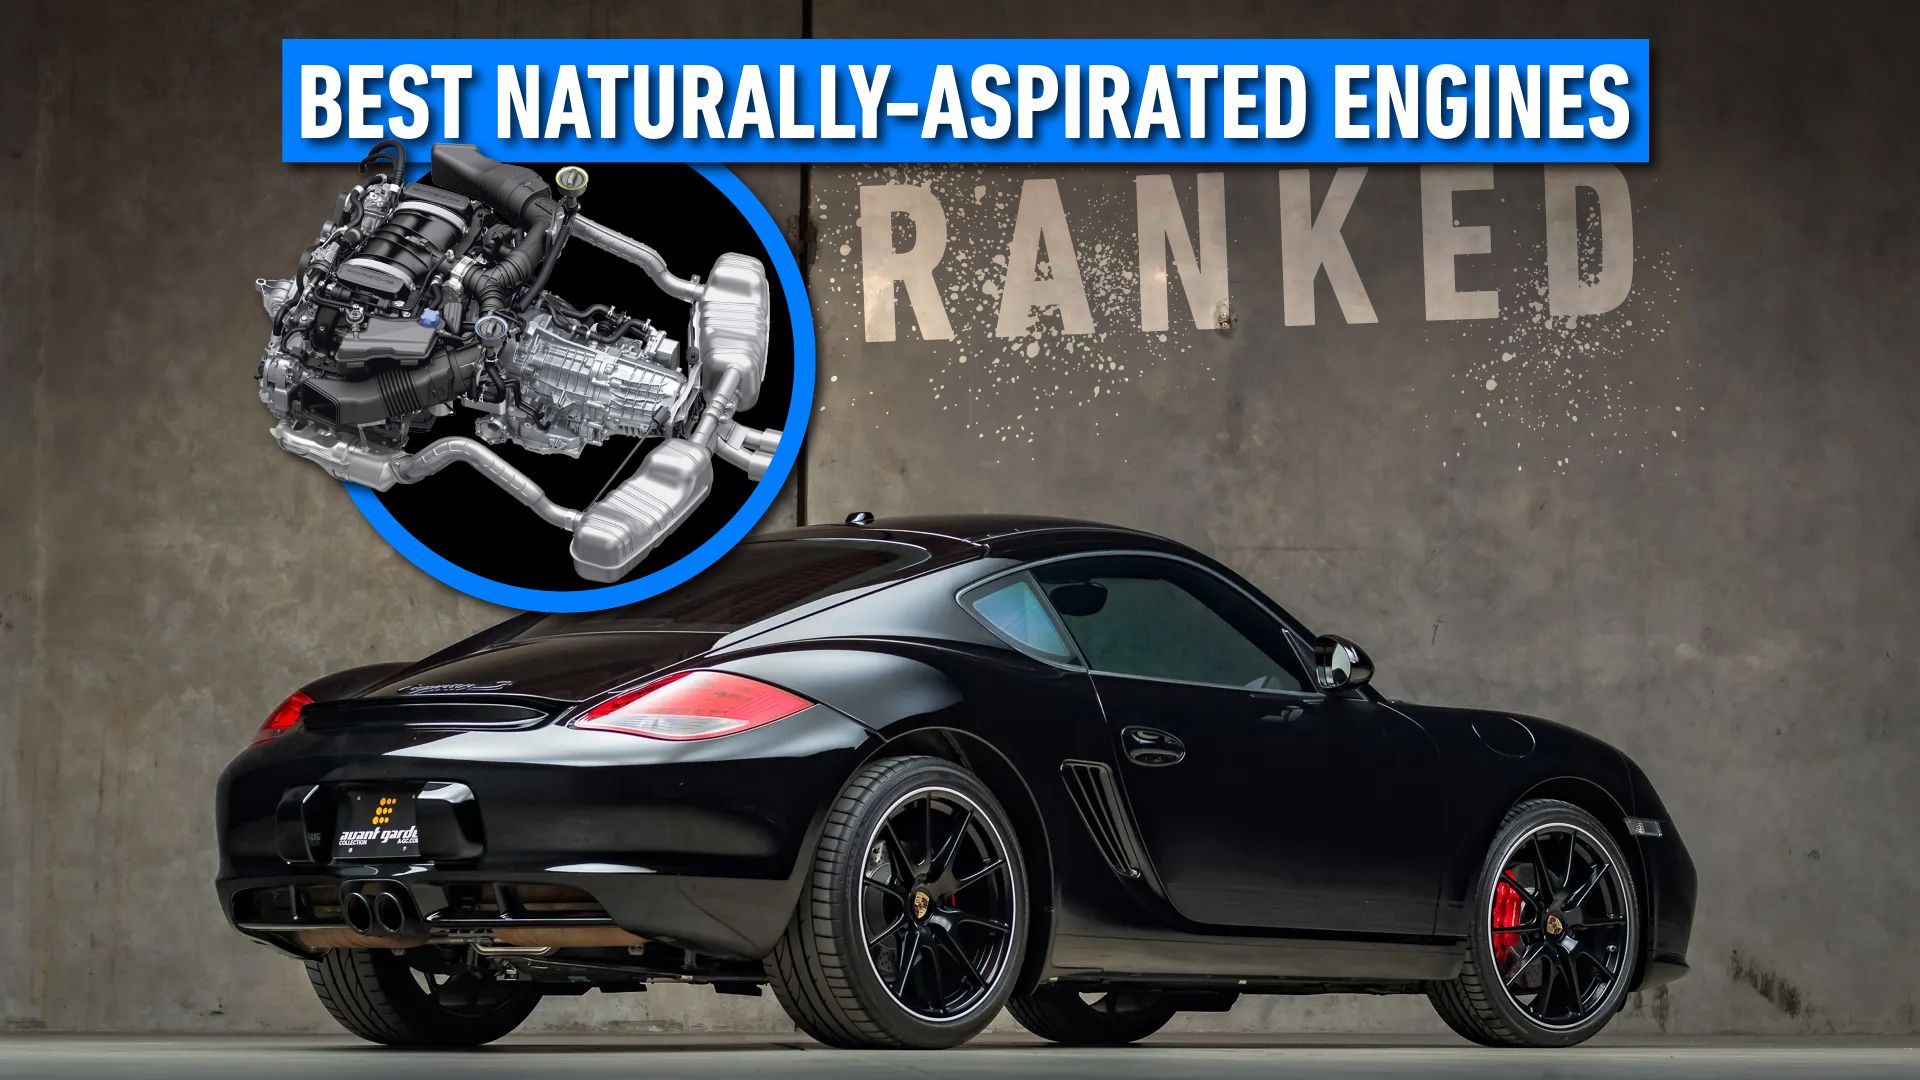 android, the best turbocharged engines, ranked based on horsepower and reliability